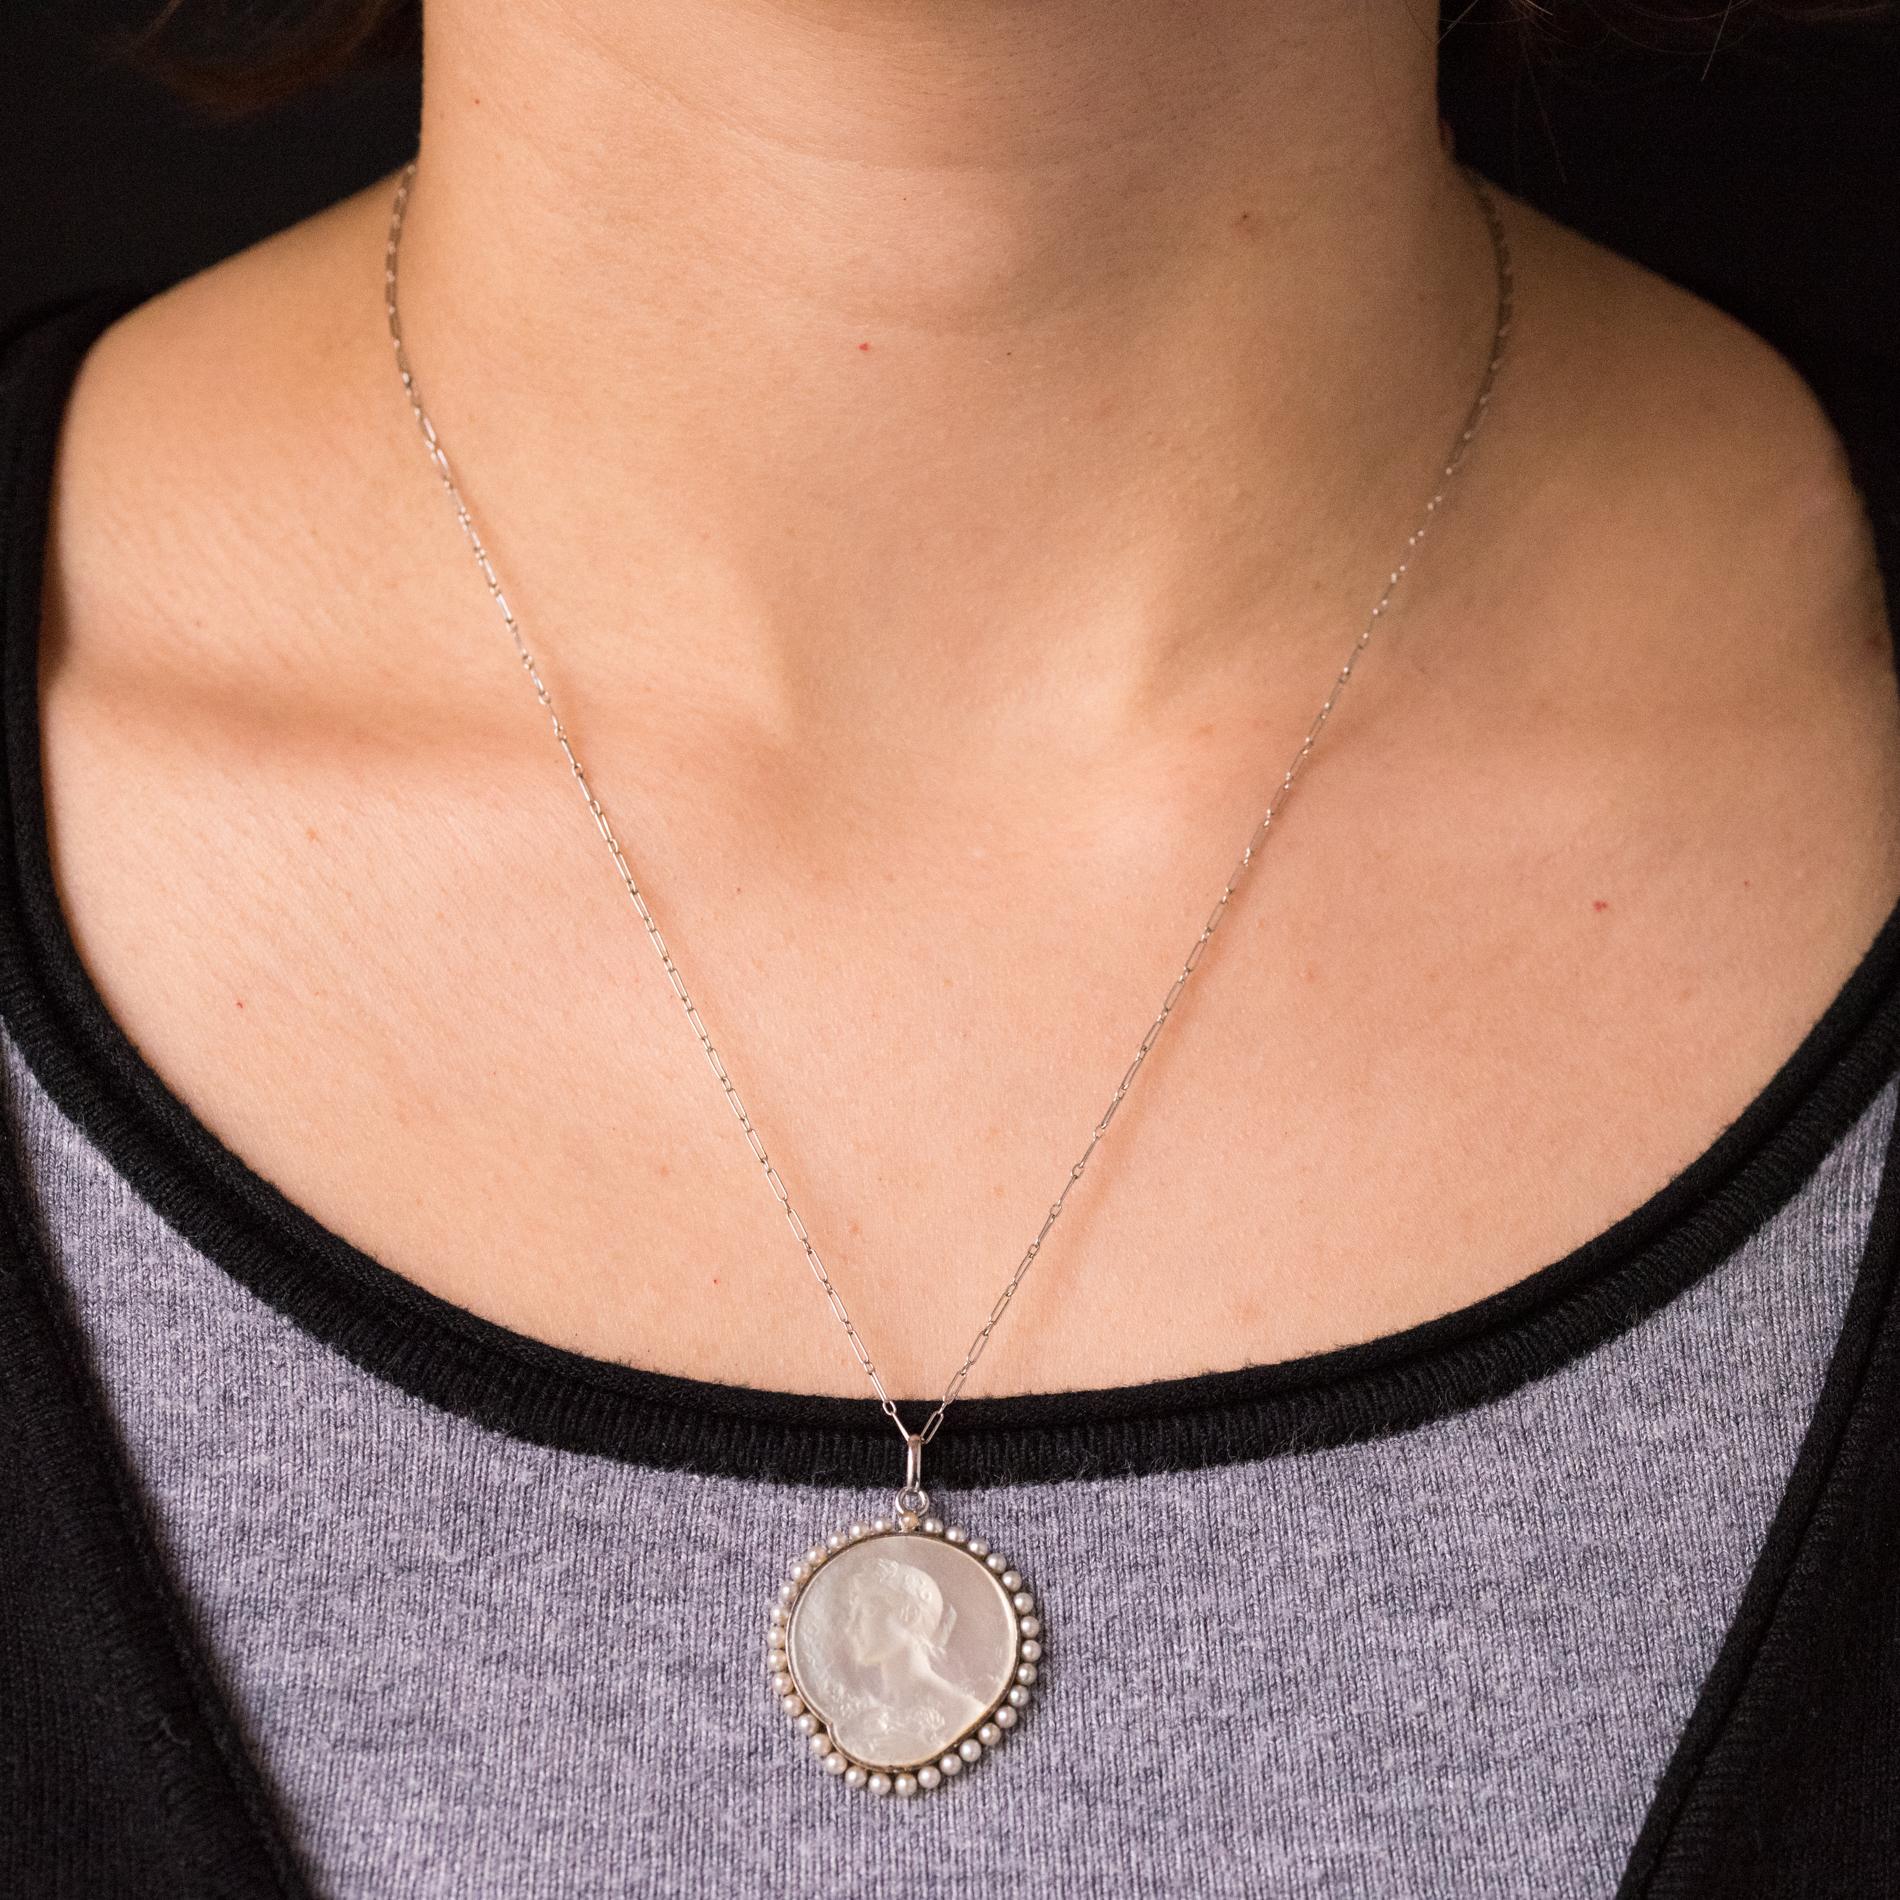 Pendant and its chain in platinum dog head hallmark.
This beautiful antique medal represents the left profile of a woman, engraved on mother-of-pearl, her hair raised with a bouquet of flowers in her hands. All the entourage is in natural pearls.